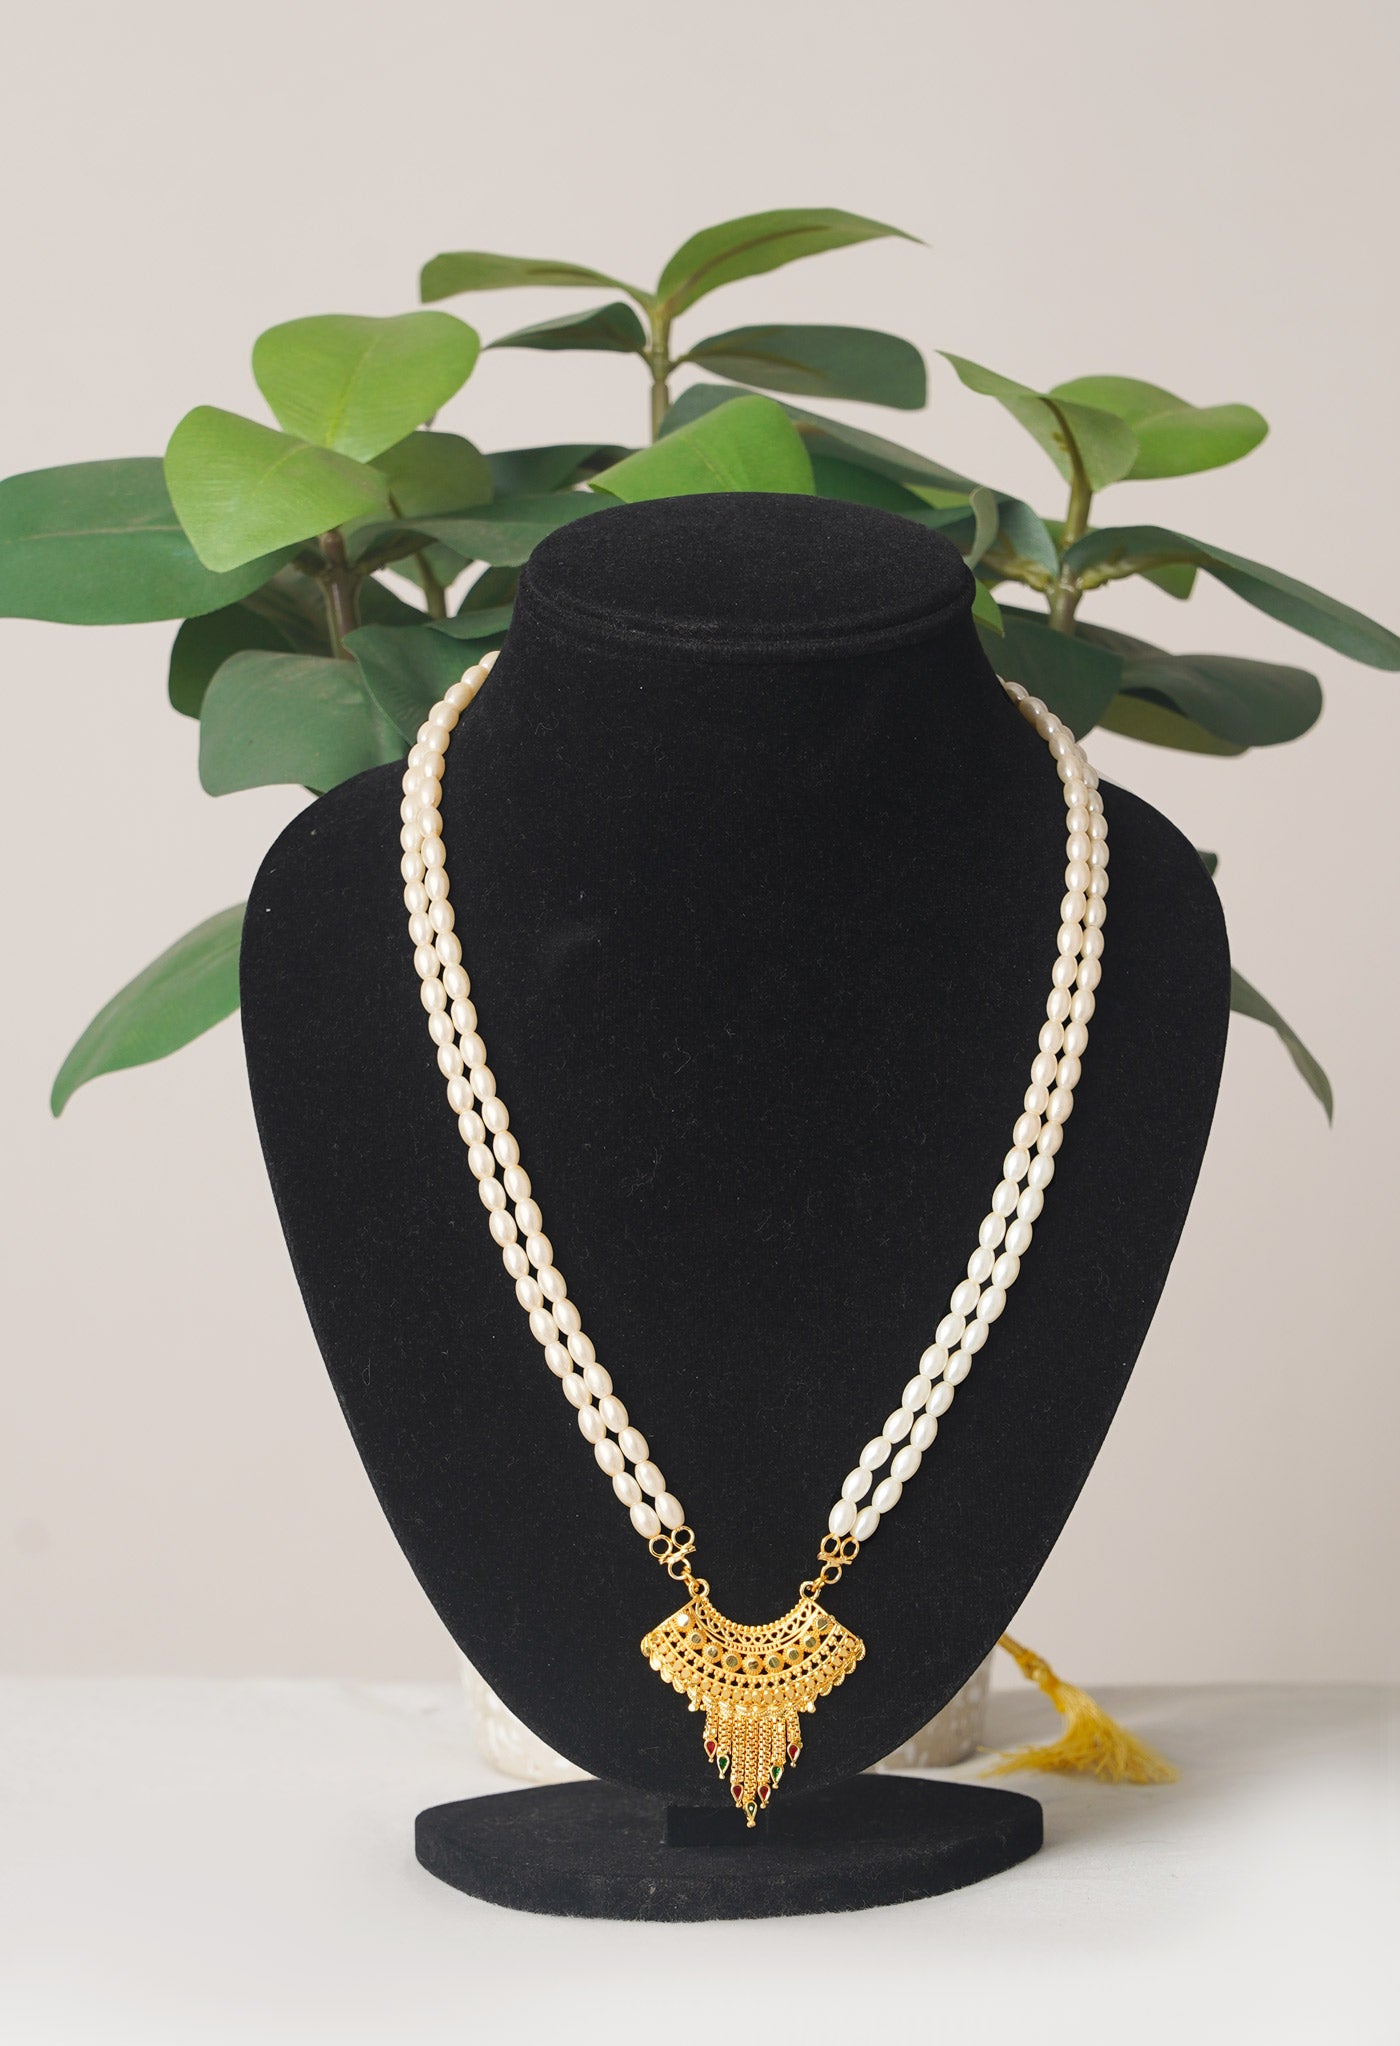 White Amravati Pearls Necklace with Pendent- UJ440